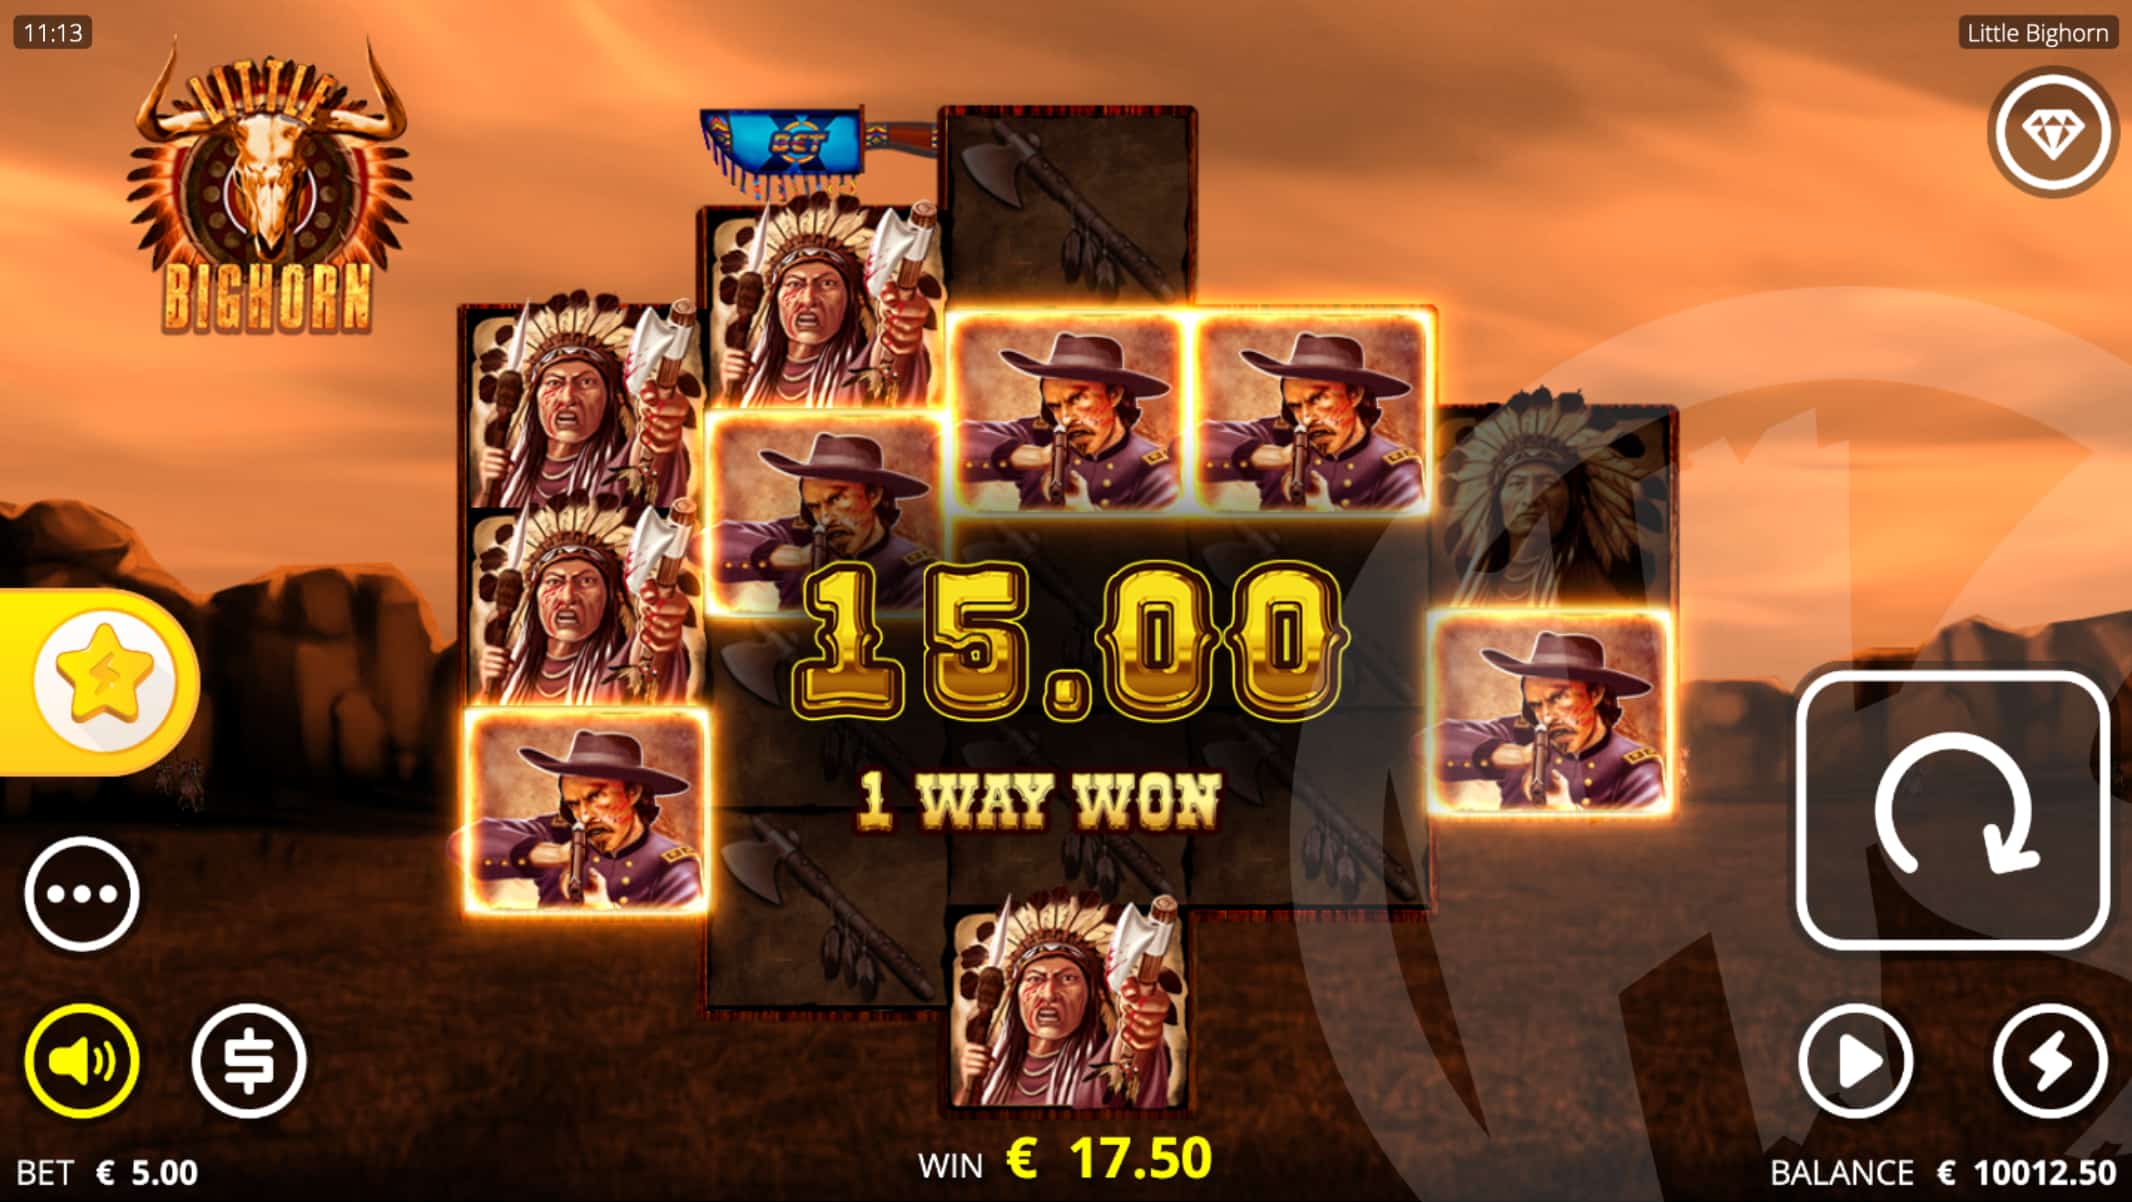 Little Bighorn Offers Players 360 Ways to Win